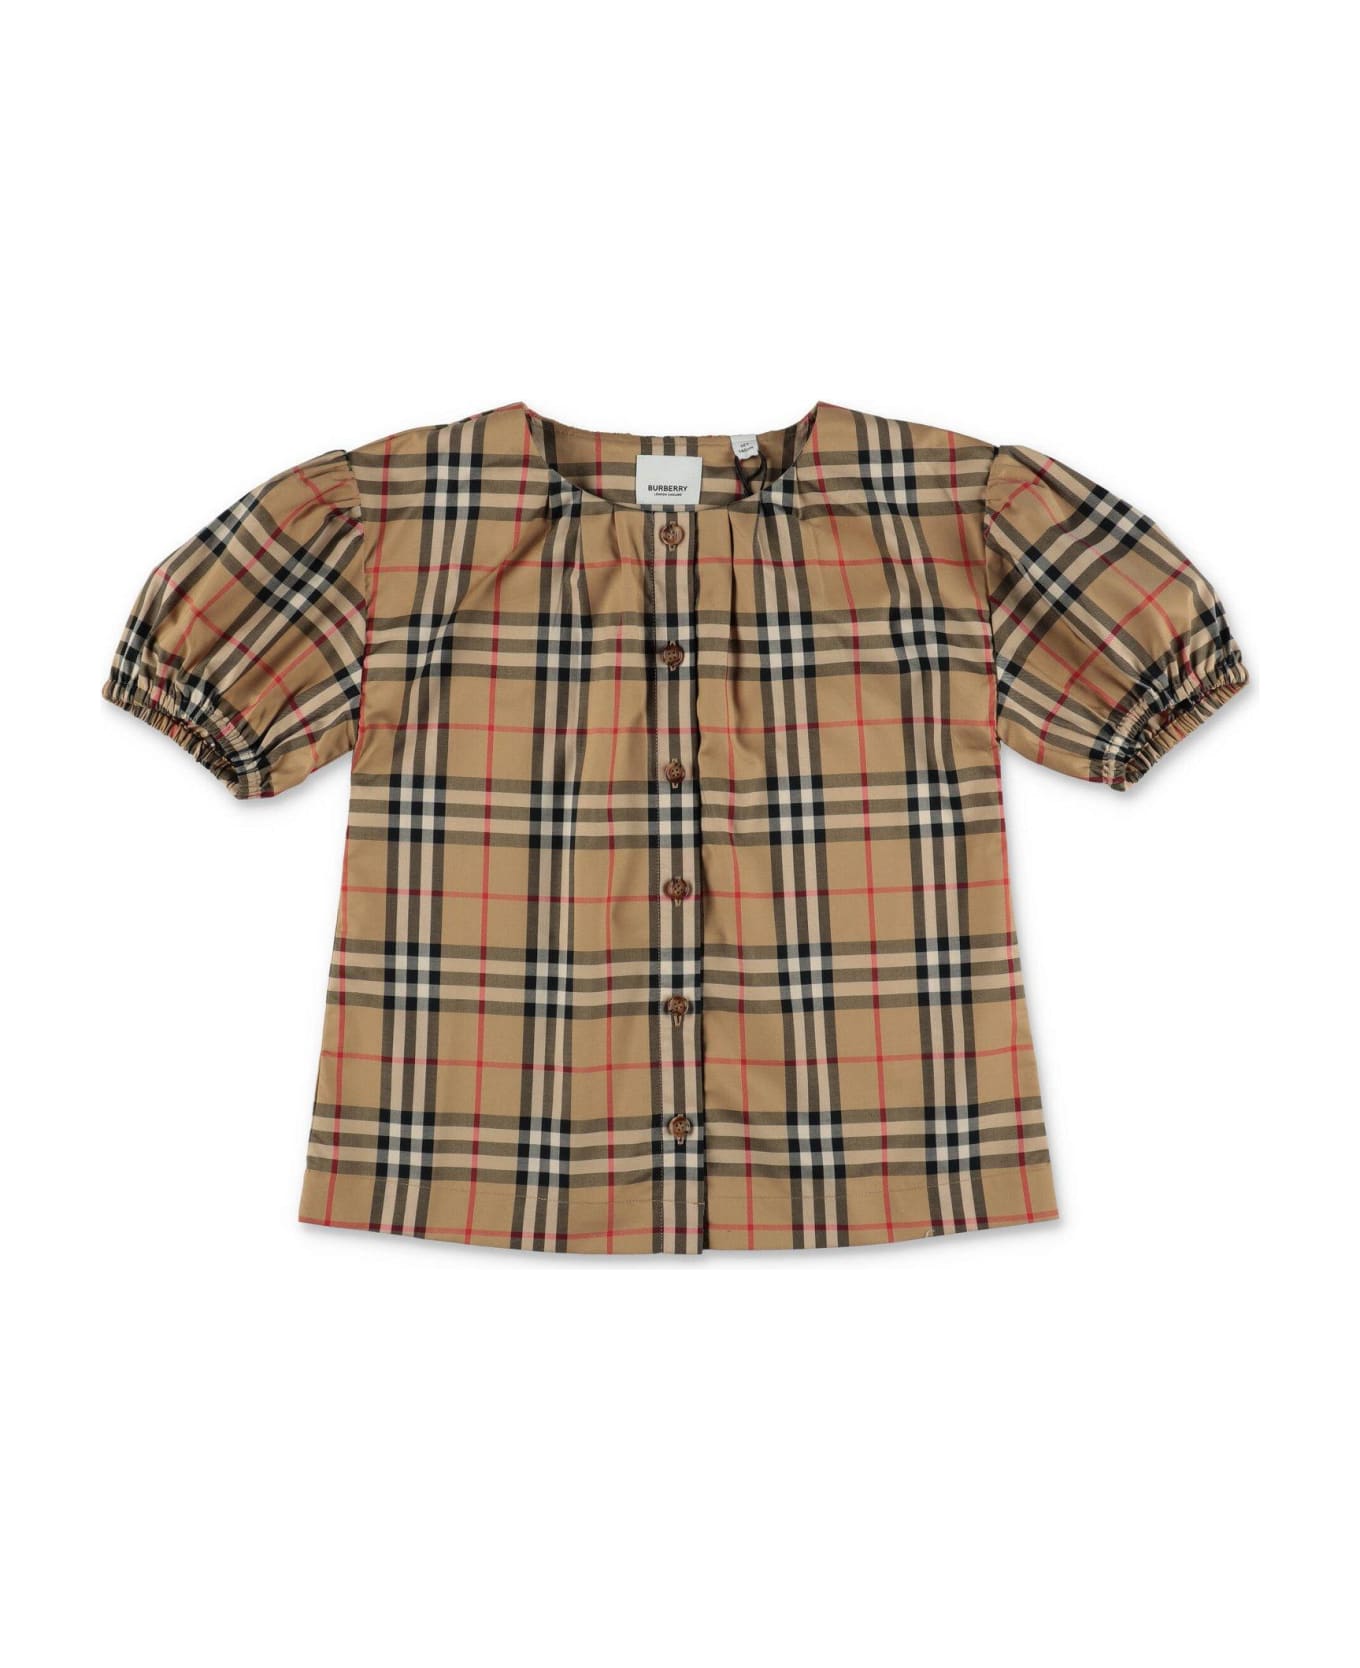 Burberry Checkered Puff Sleeved Twill Blouse - Archive beige ip chk シャツ